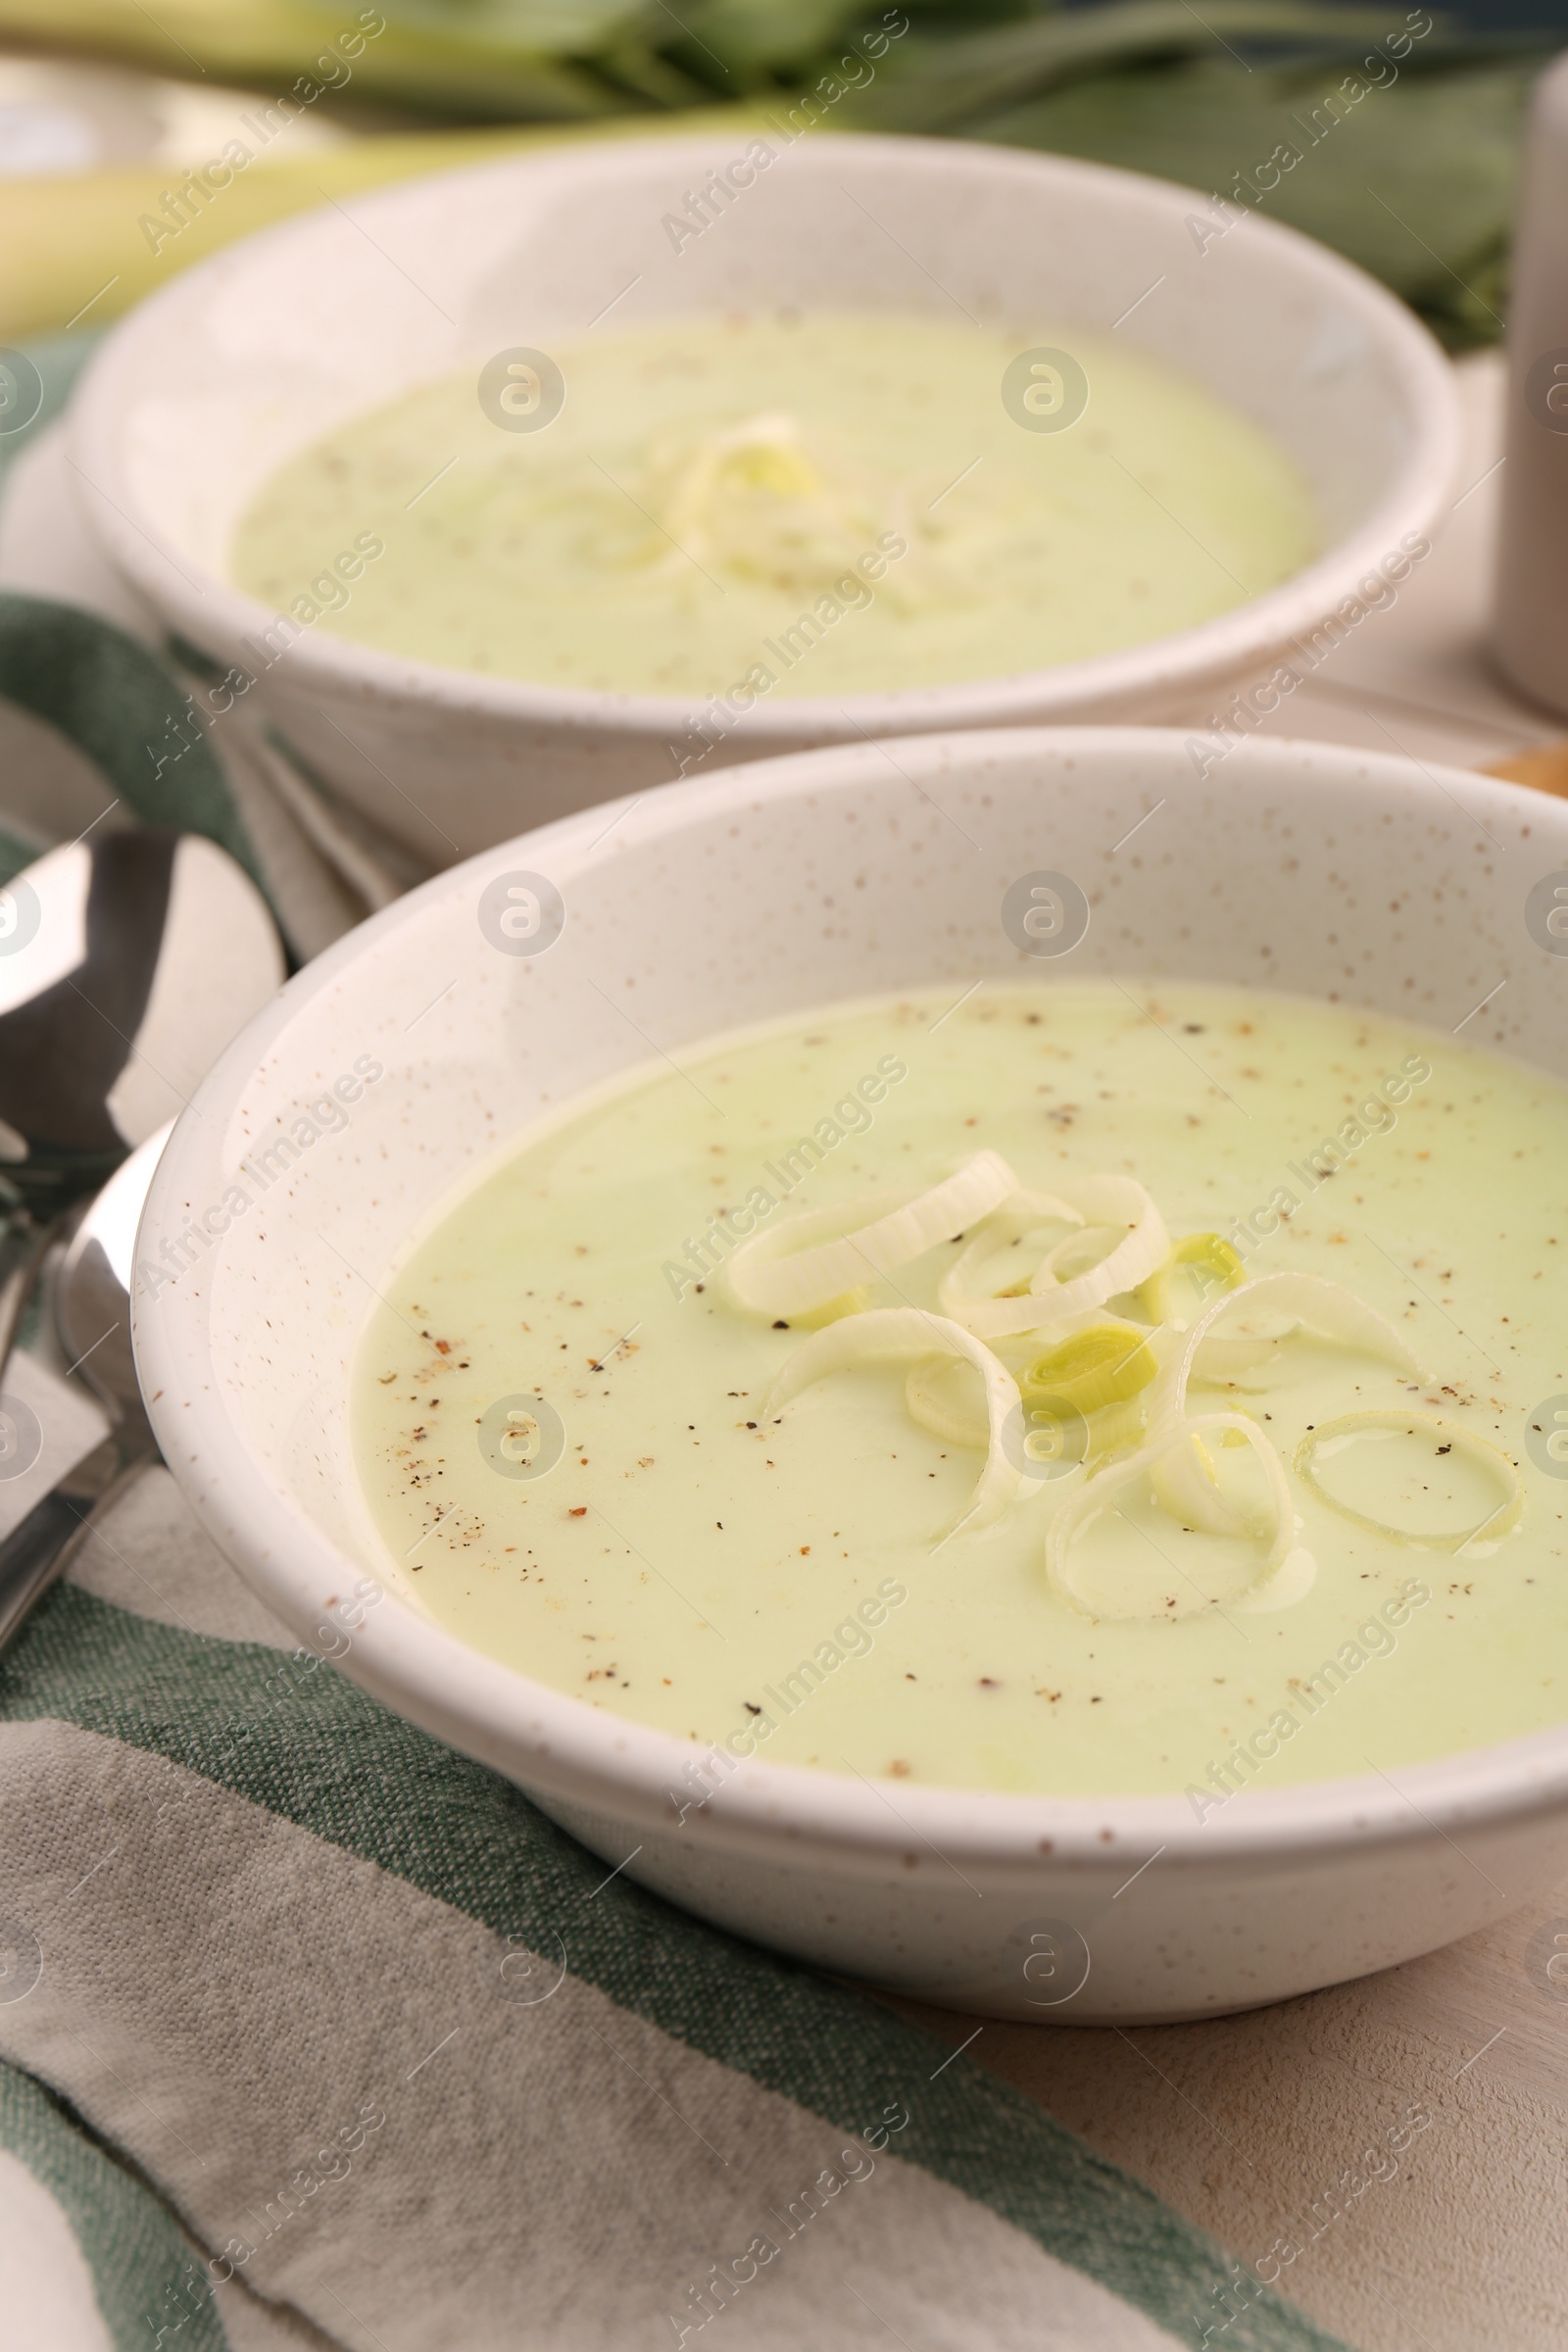 Photo of Bowls of tasty leek soup on table, closeup